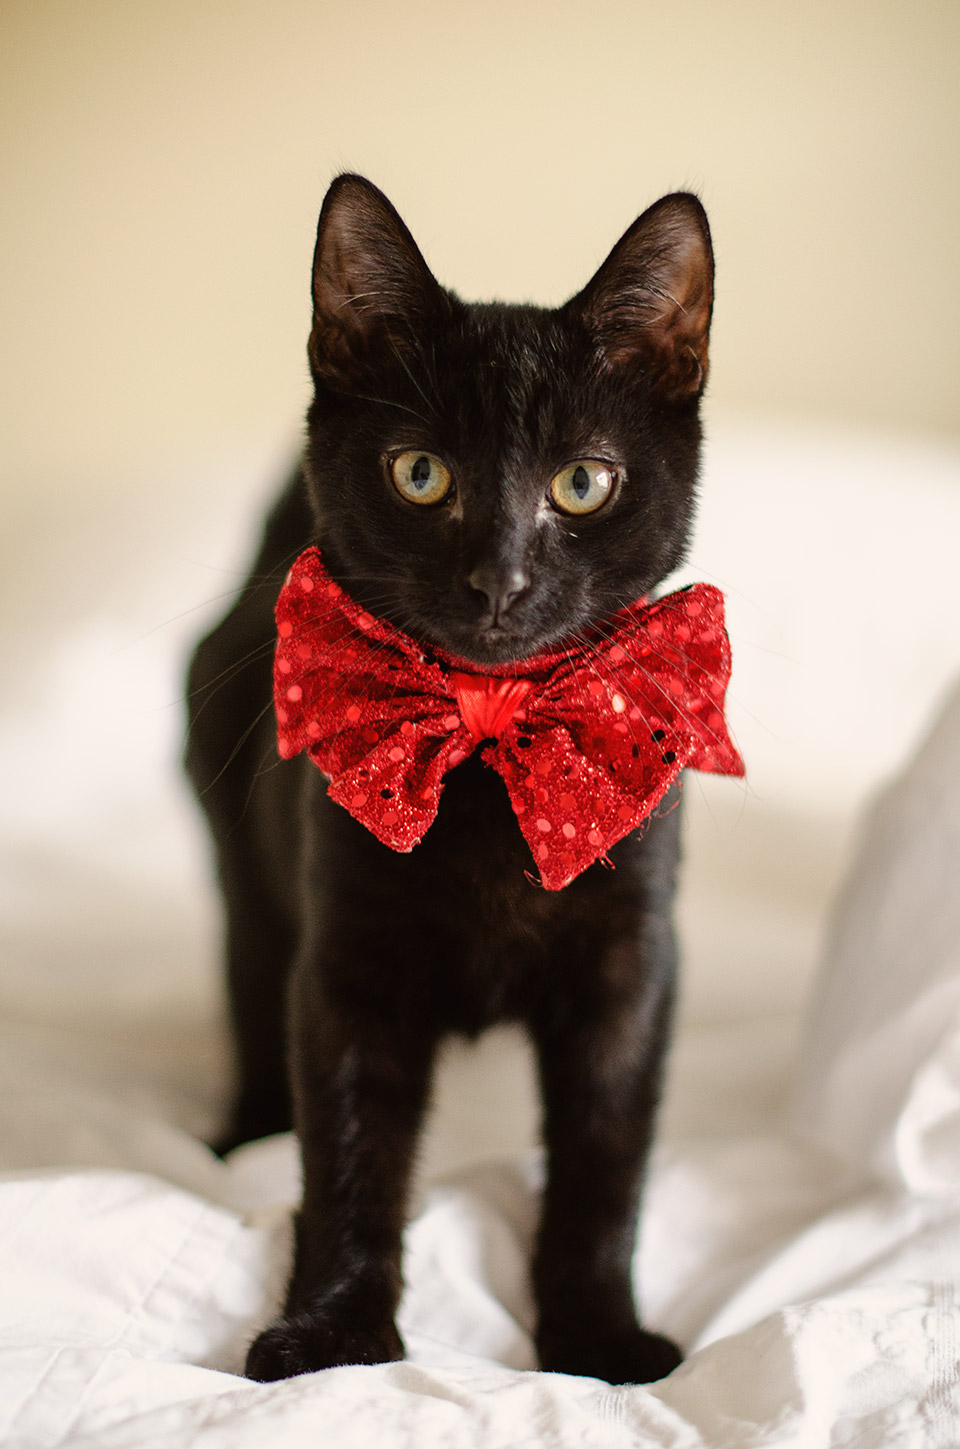 Reasons to adopt a black cat Melbourne Pet Photography 04